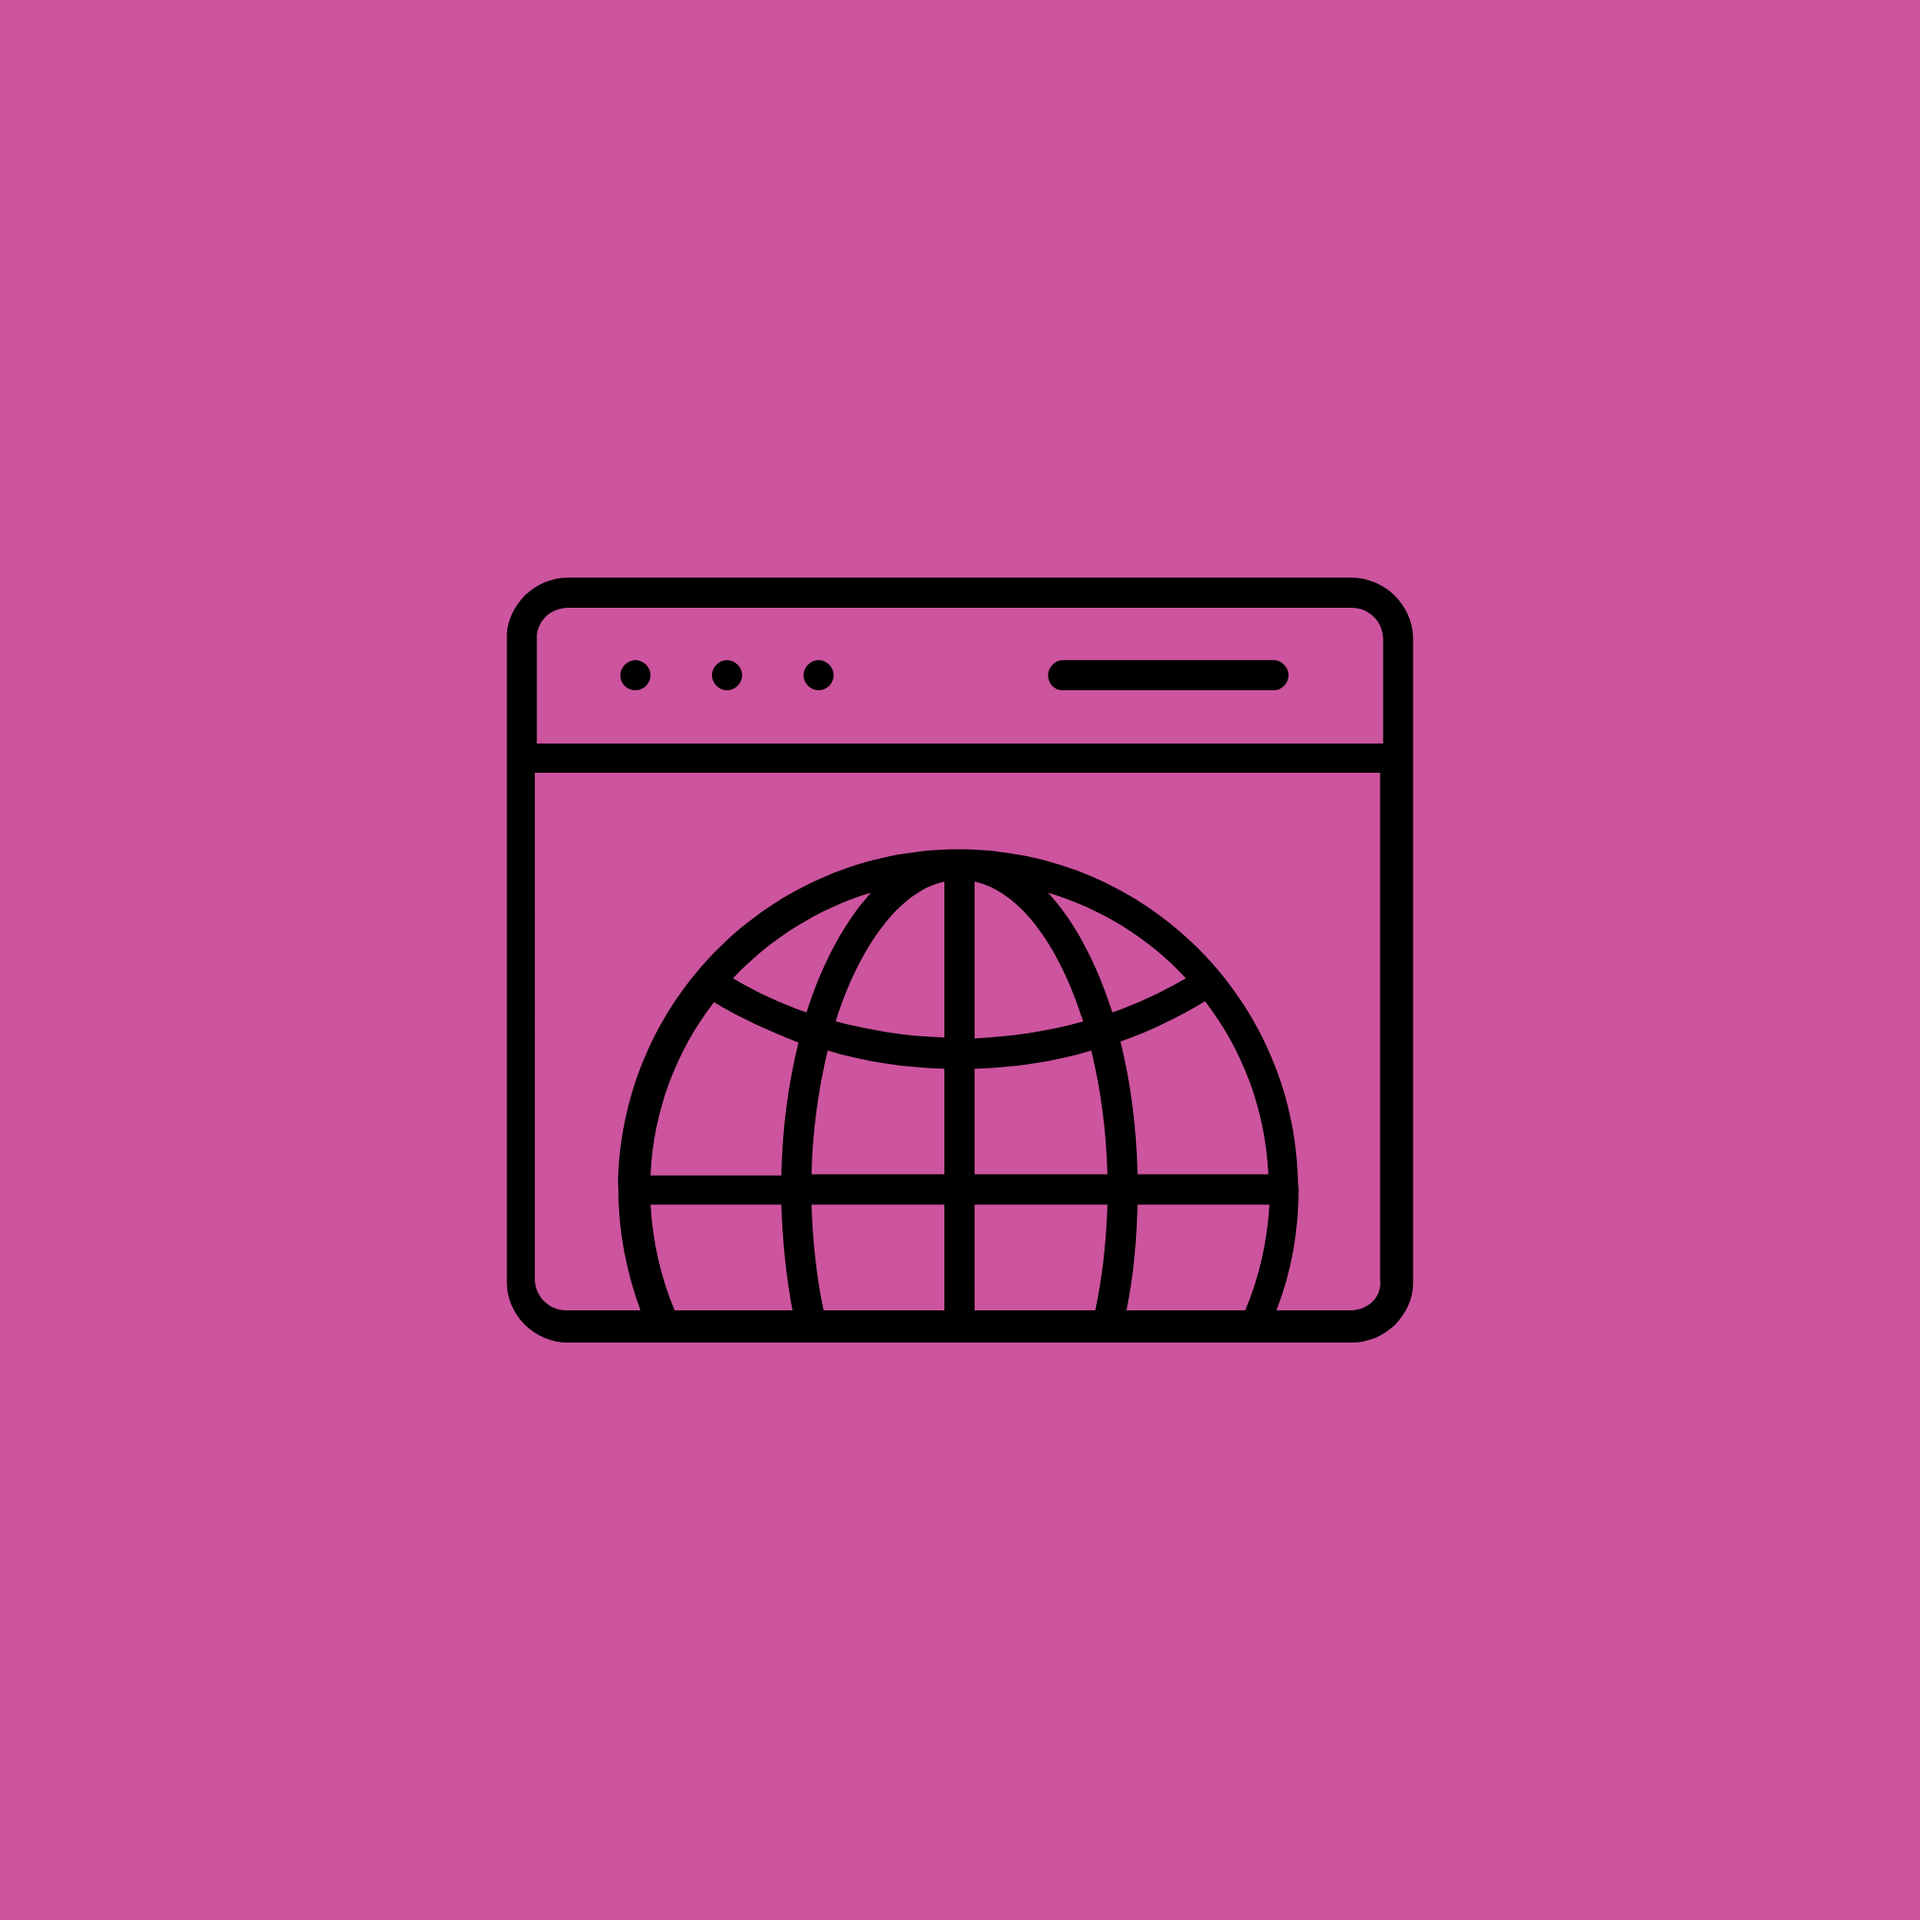 A computer screen with a globe on it on a pink background.